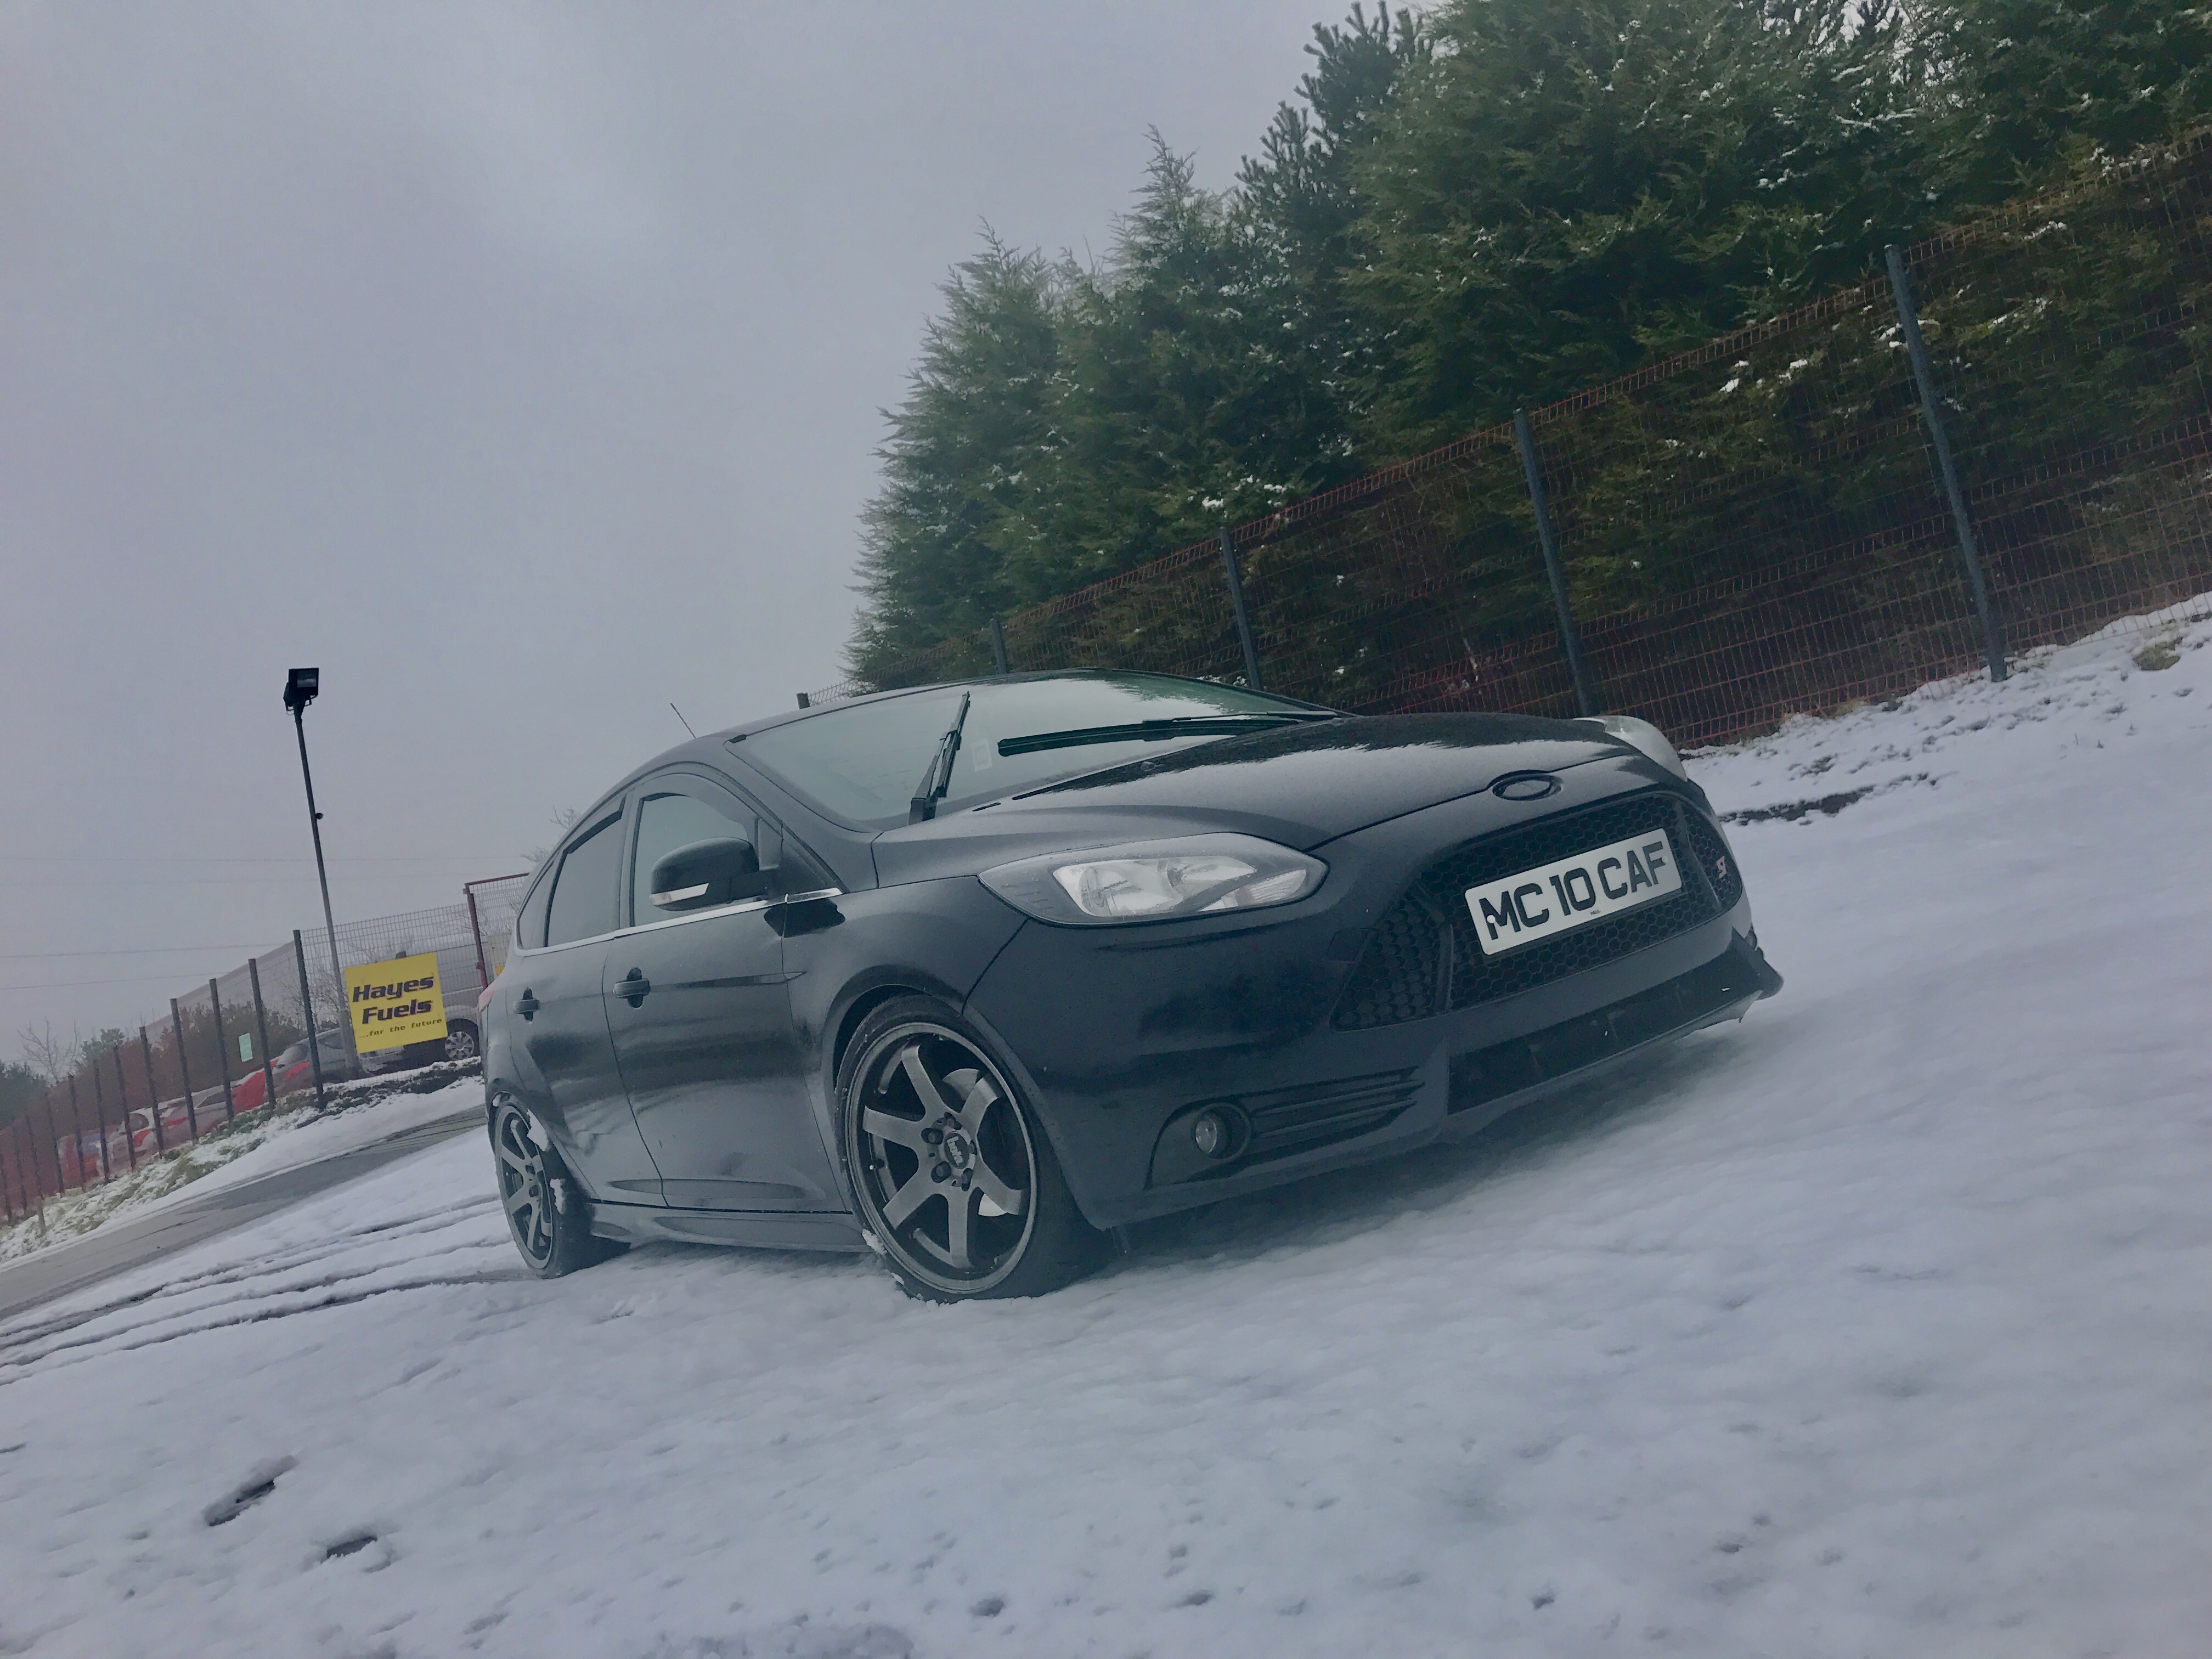 MK3 1.6TDCi Tuning? ADVICE? - Ford Focus Club - Ford Owners Club - Ford  Forums